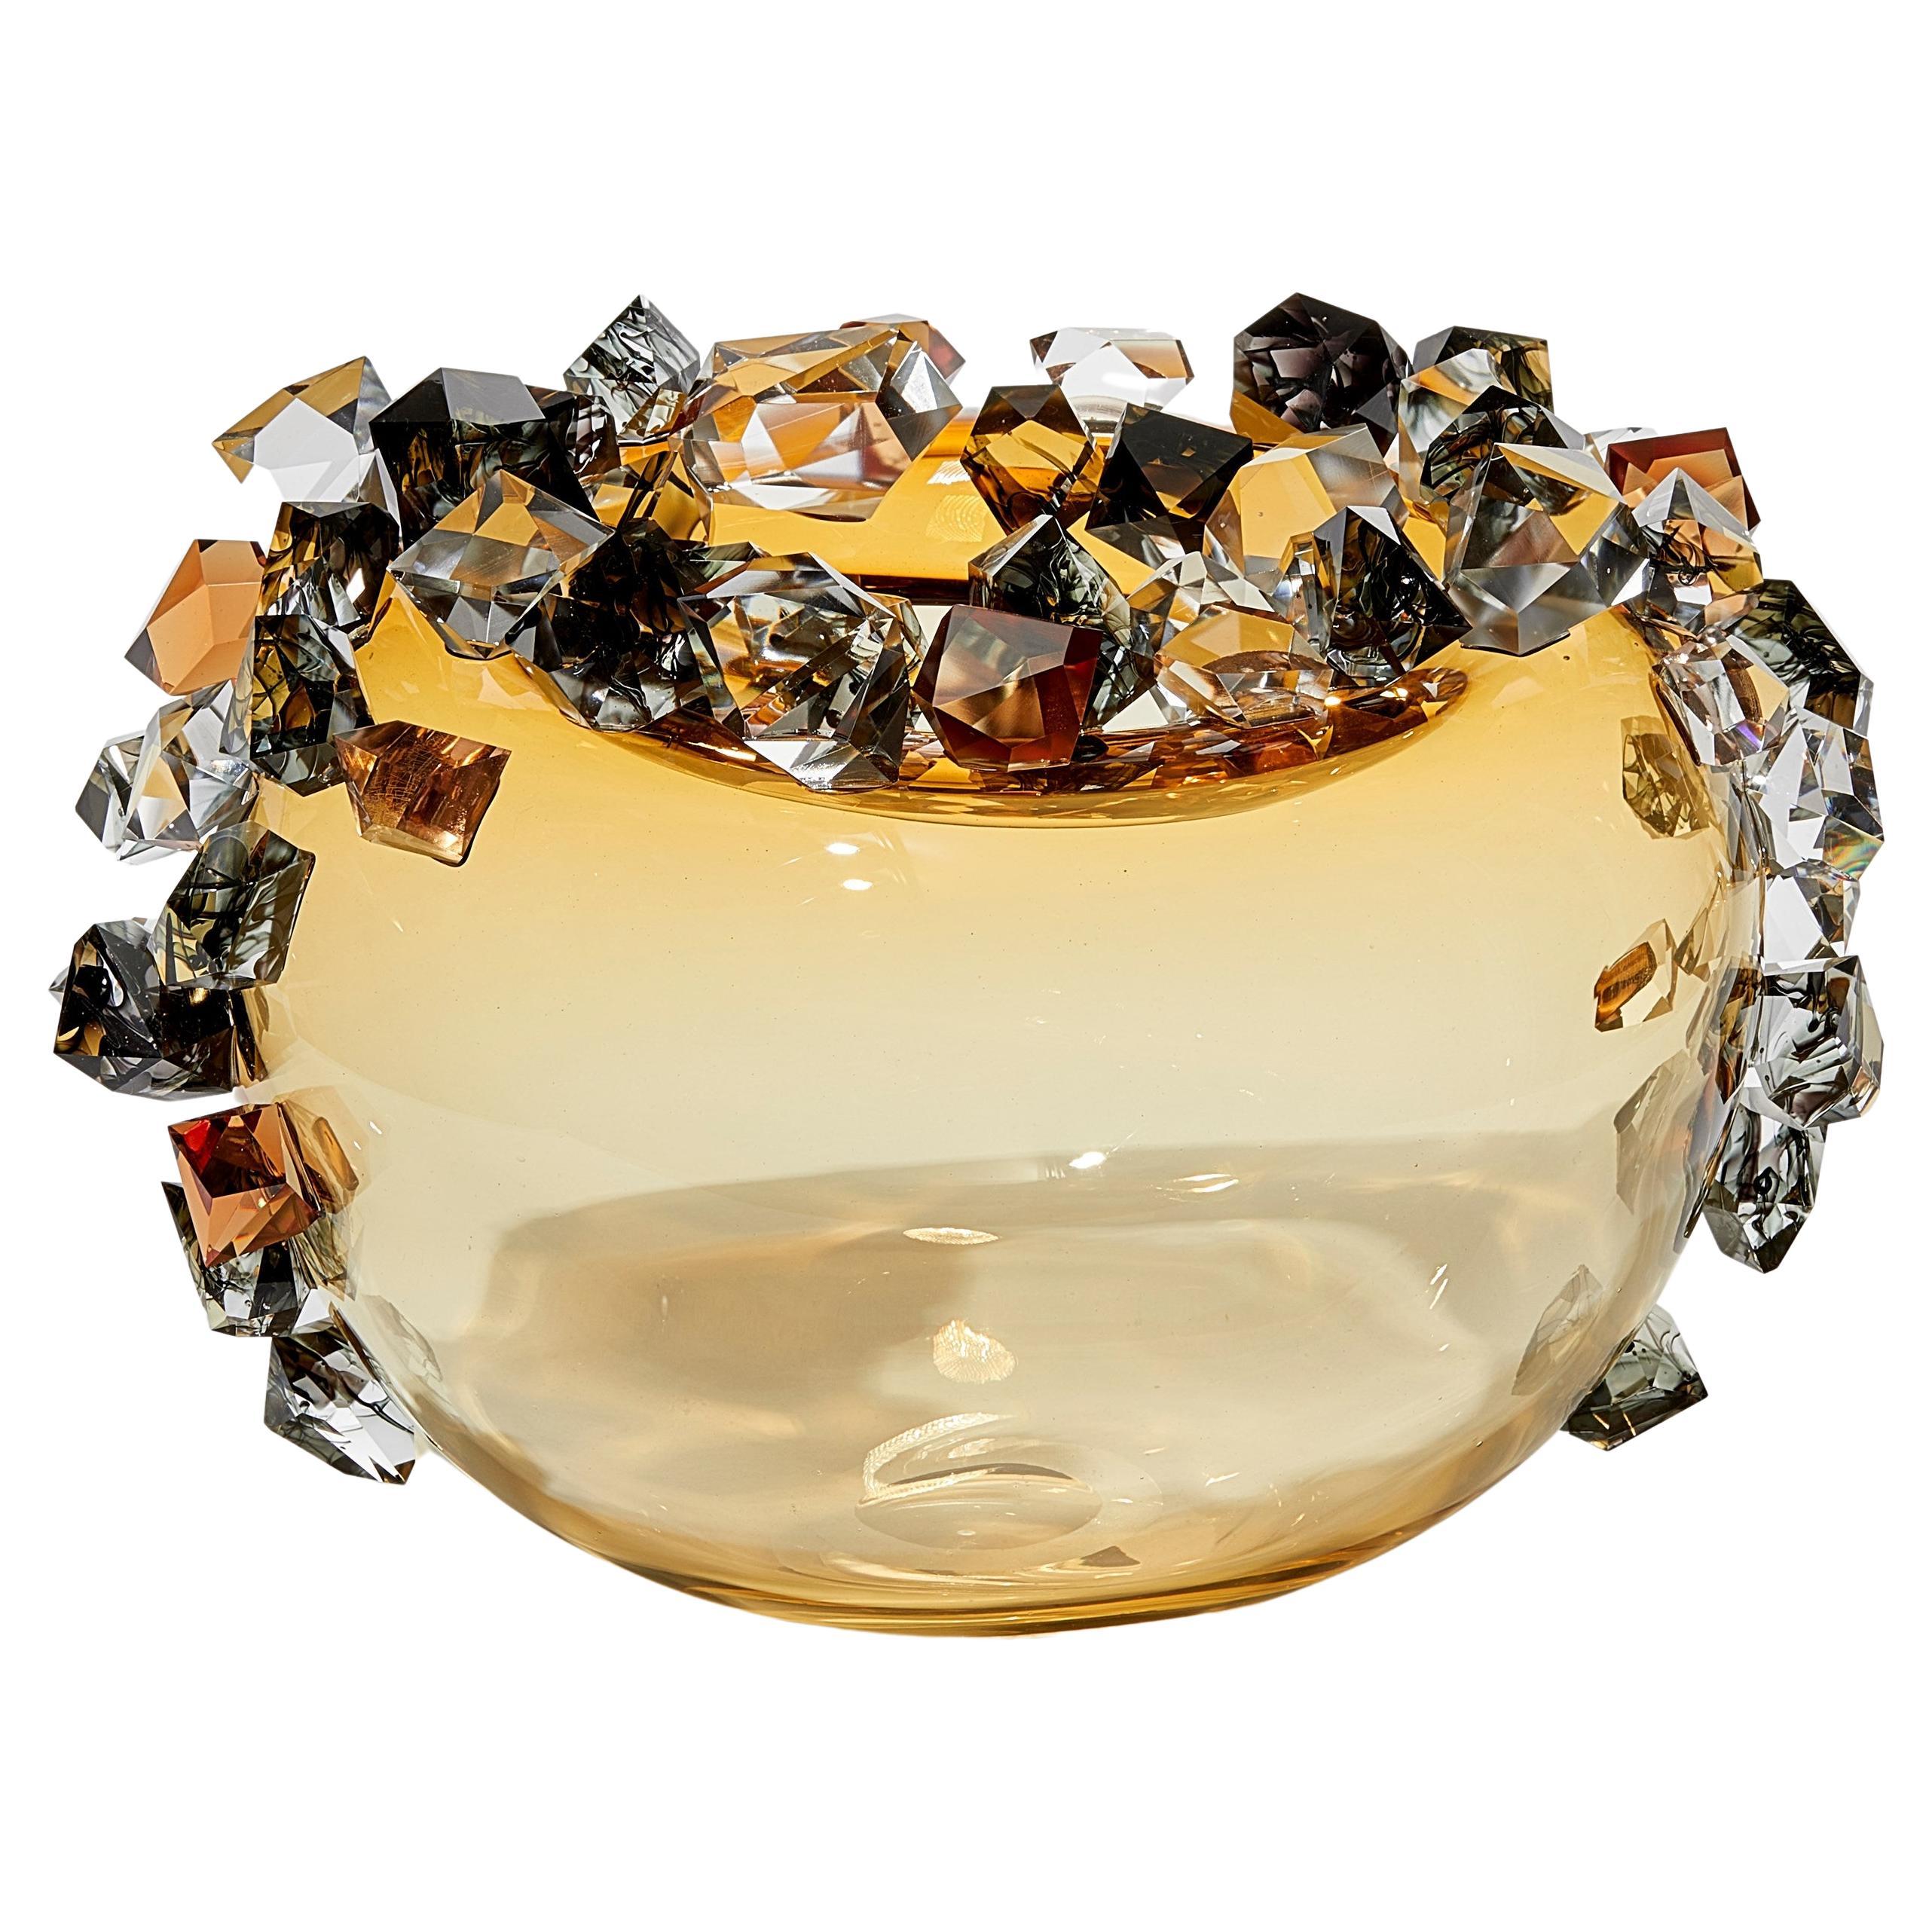 Cristal Diffusion in Amber, crystal adorned glass sculpture by Hanne Enemark For Sale